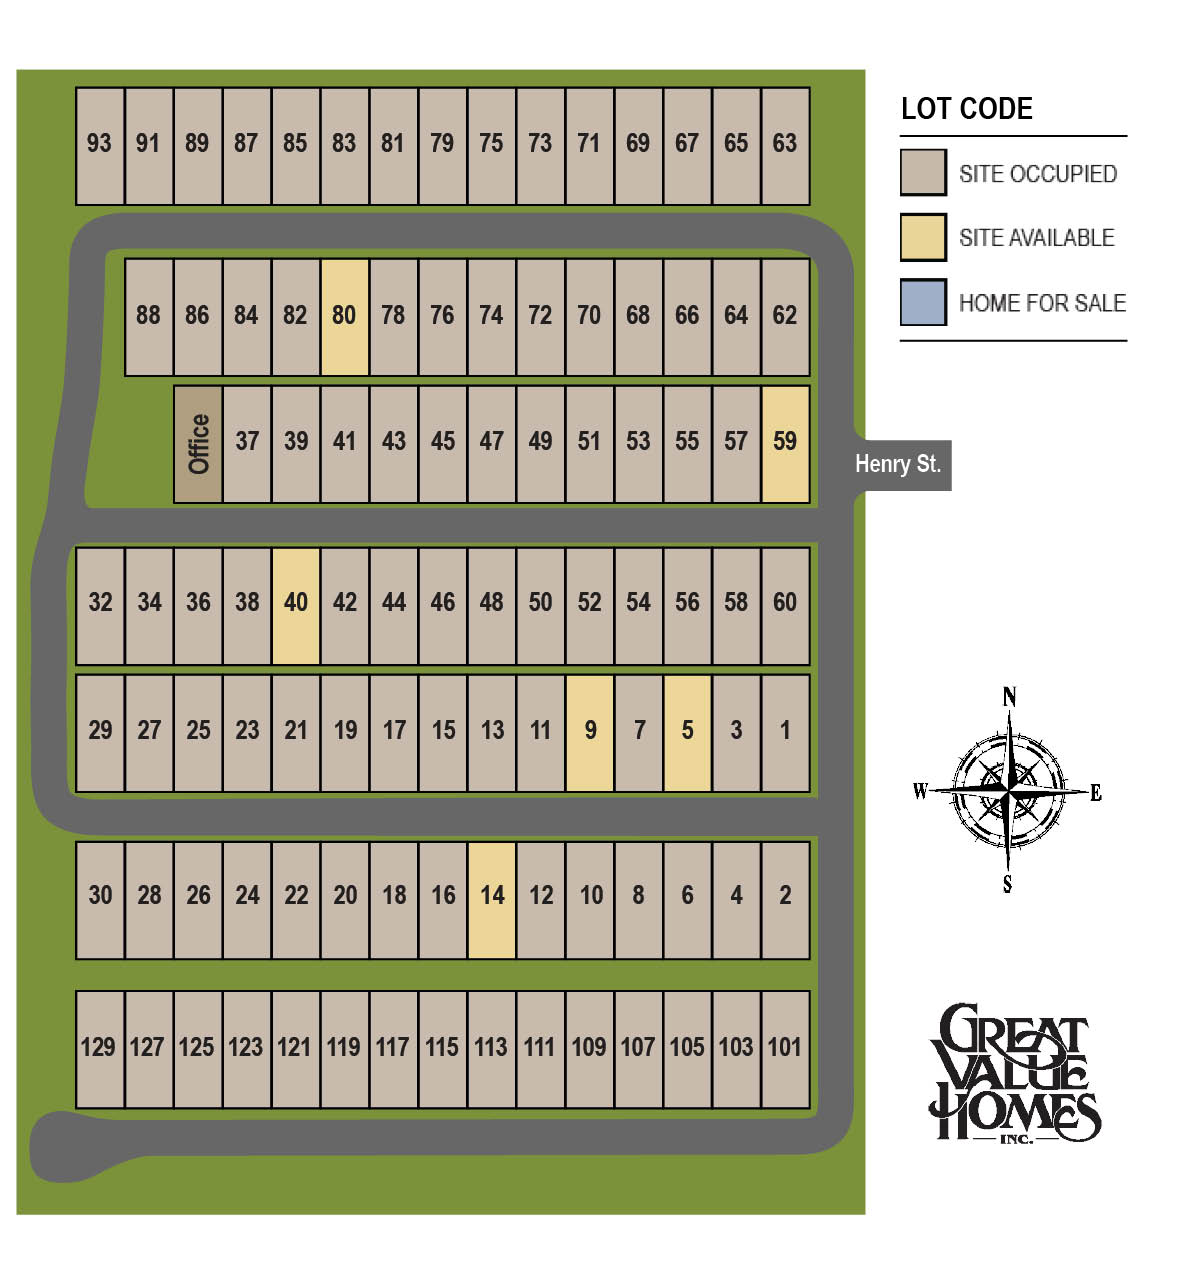 Northwood Village Plat Map- New London WI Manufactured Homes Neighborhood - Great Value Homes